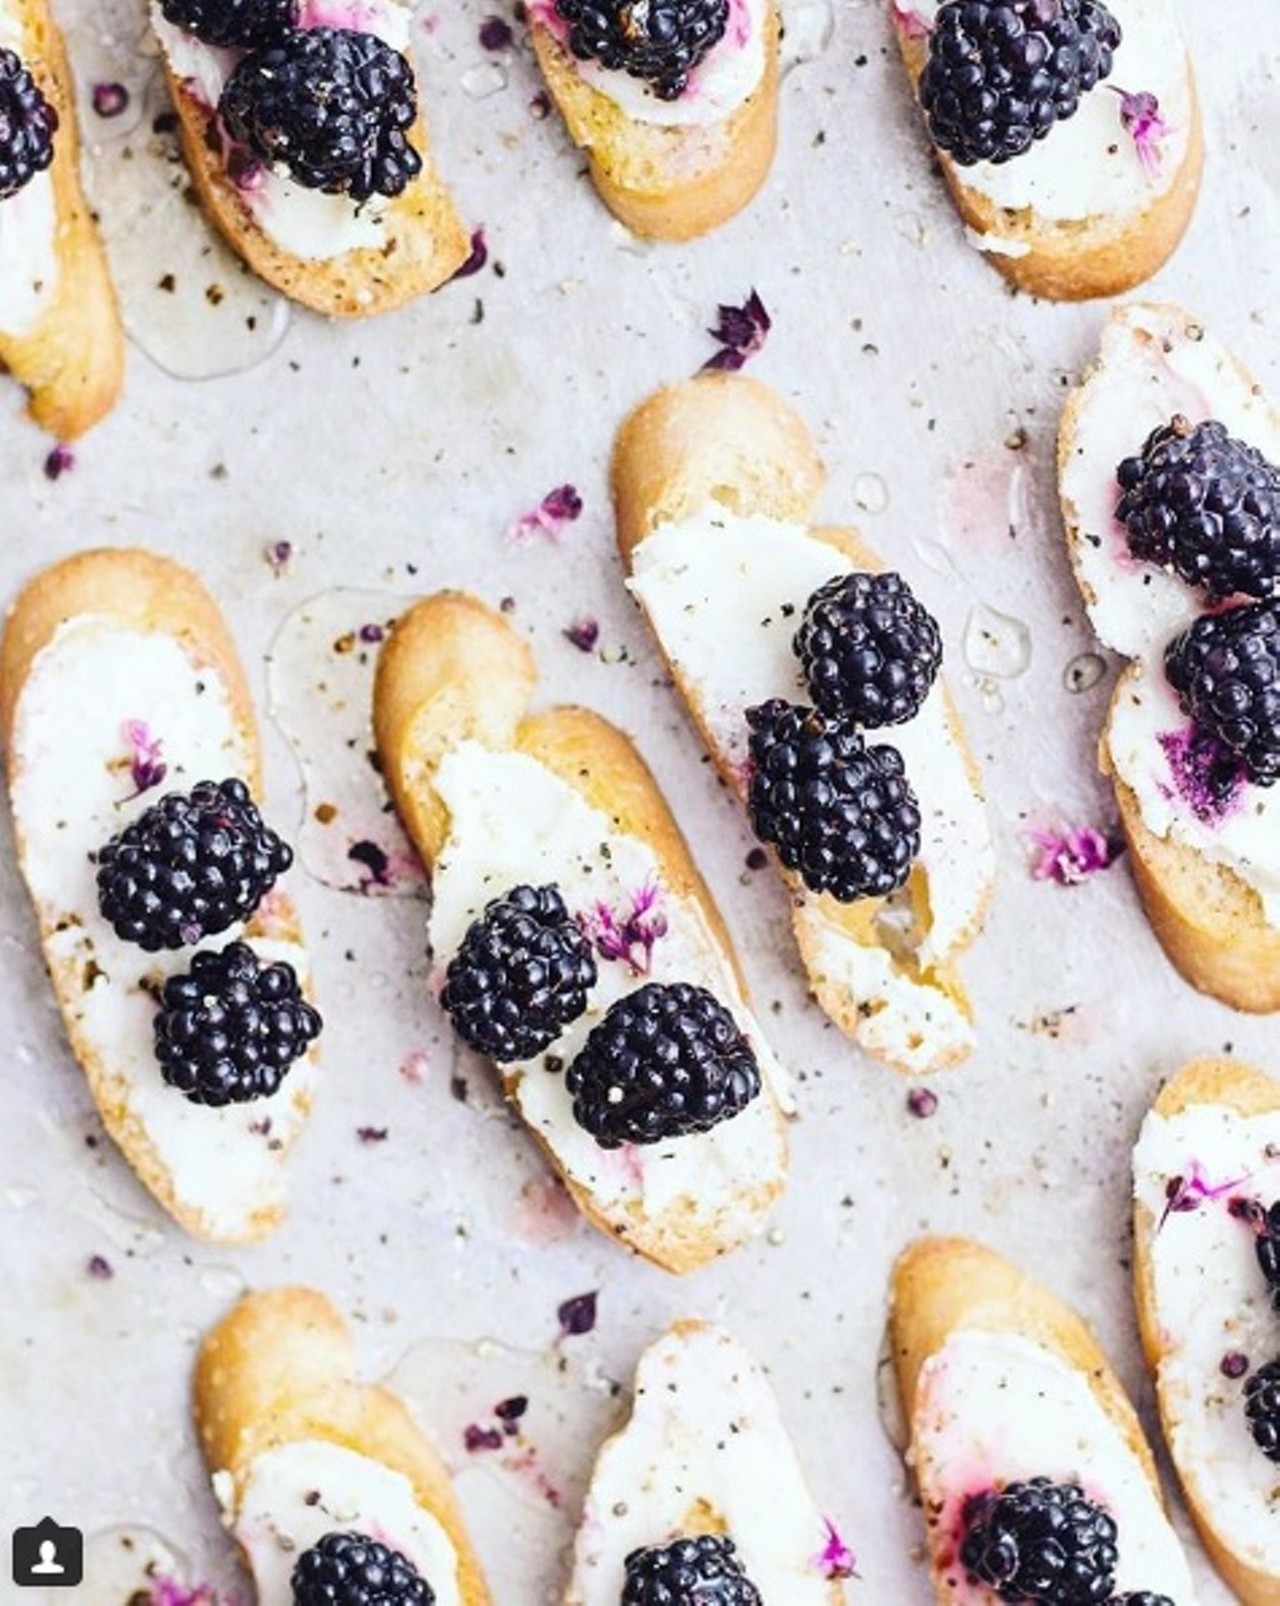 Goat cheese toast with quick-pickled blackberries, truffle honey and basil blossoms. Photo courtesy of Instagram / withfoodandlove.